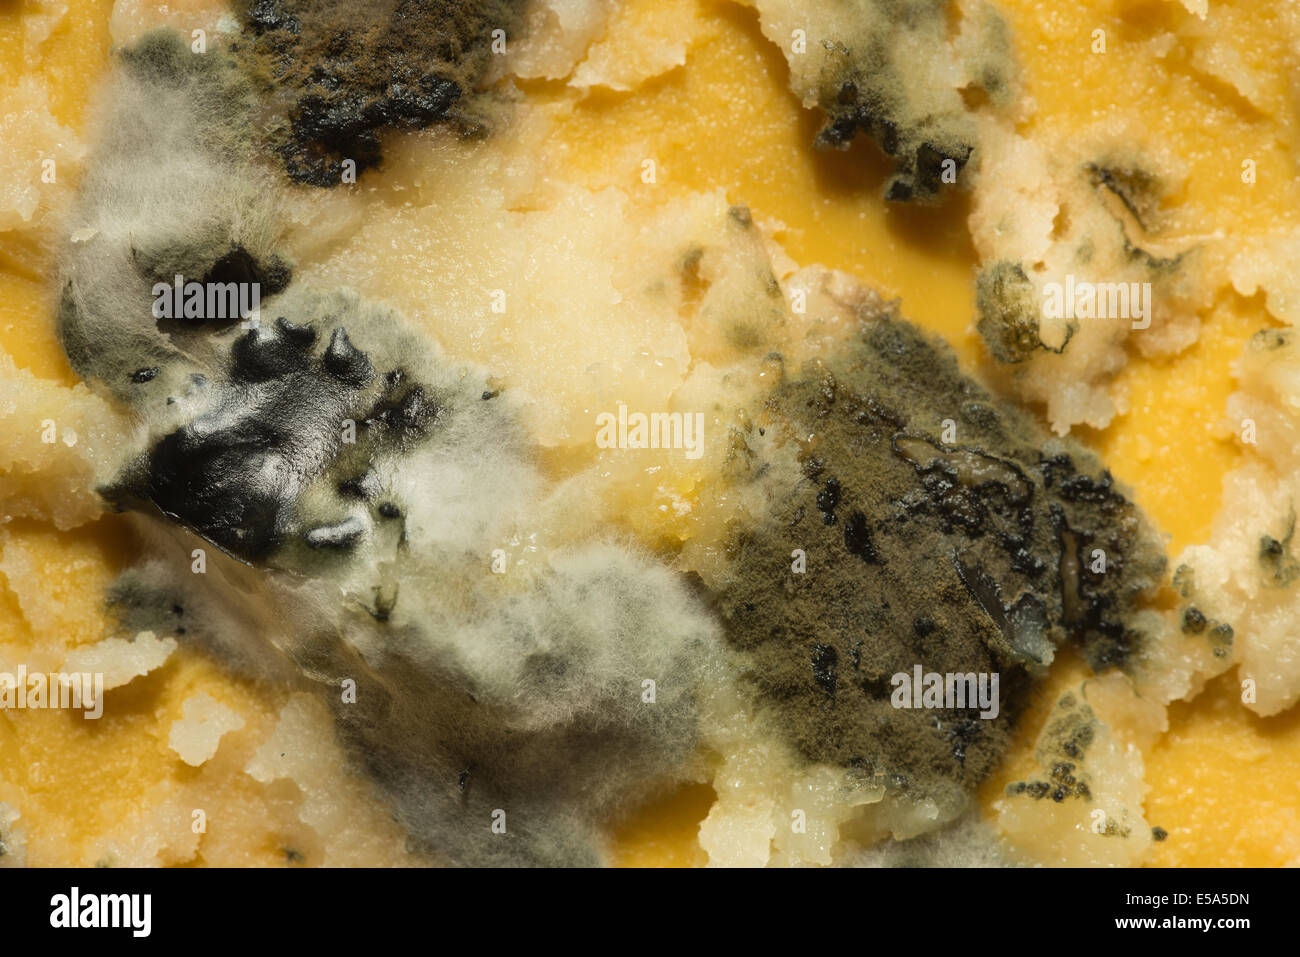 Mouldy meal forgotten penicillin growth impregnated with hyphae long branching filamentous structure breaking down butter ghee Stock Photo